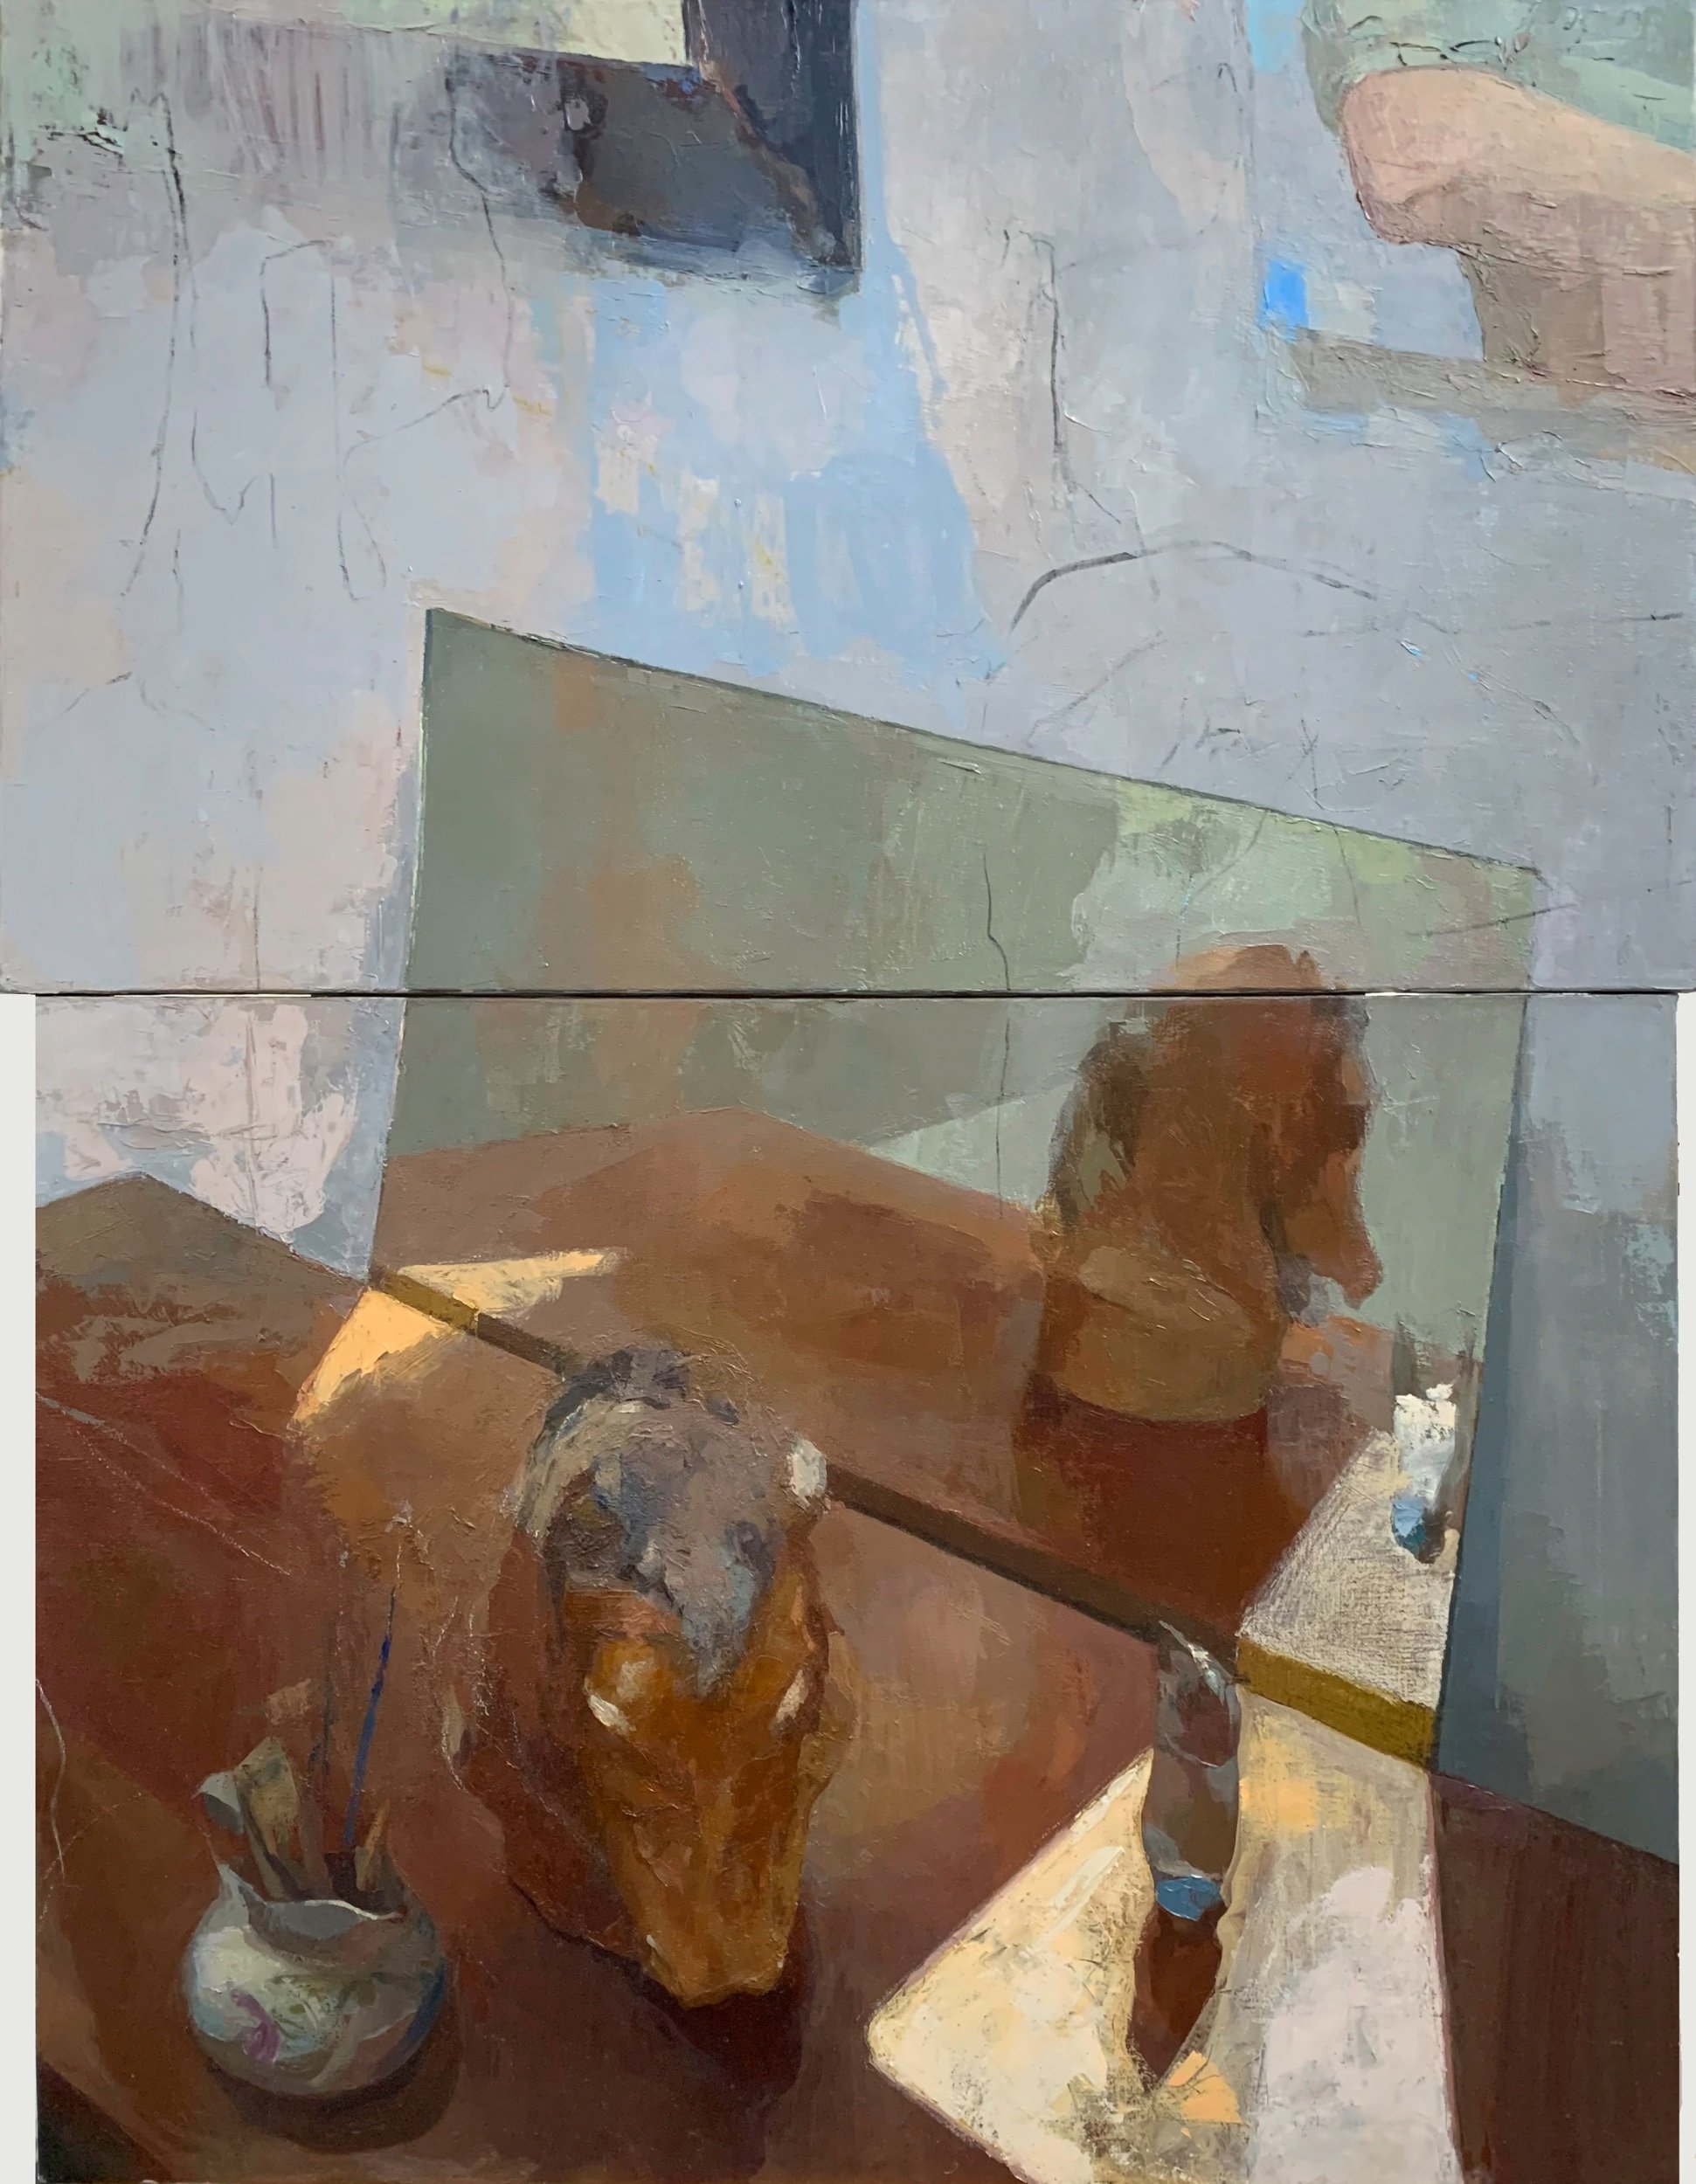   Horse head with Mirror   2020  44” x 34”  oil on linen 